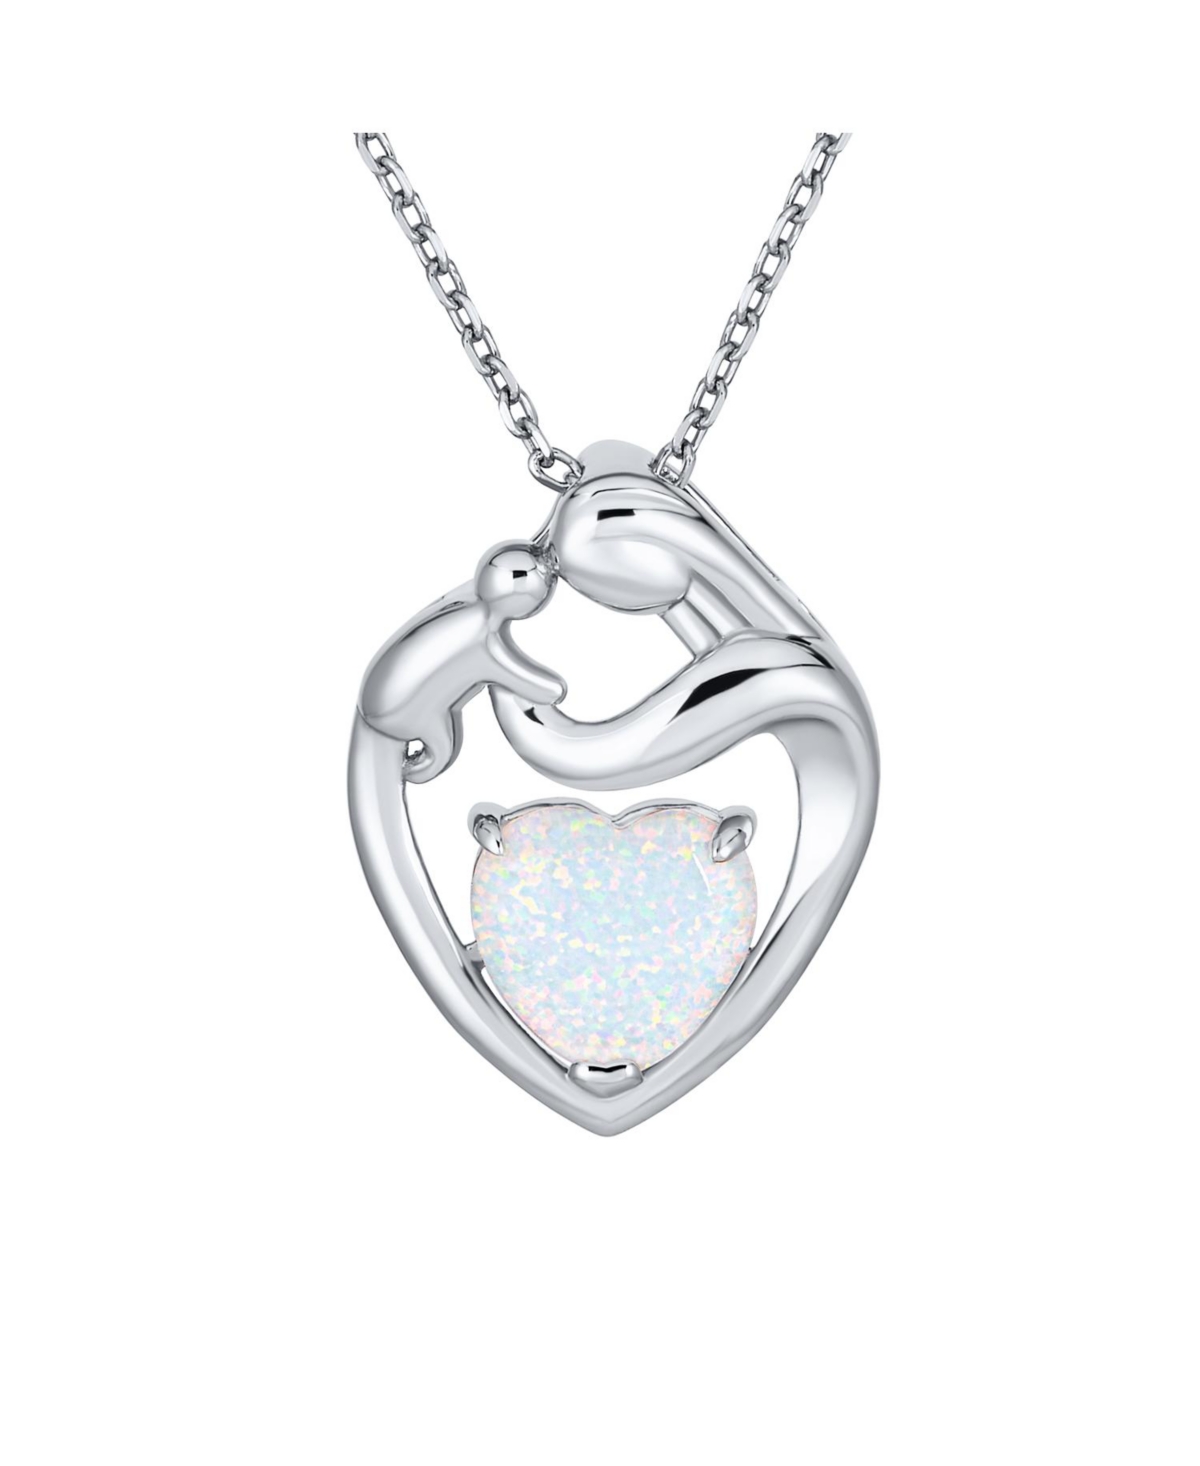 Gemstone Family Parent New Mother Created White Opal Heart Shaped Mom Loving Son Child Daughter Necklace Pendant For Women .925 Sterling